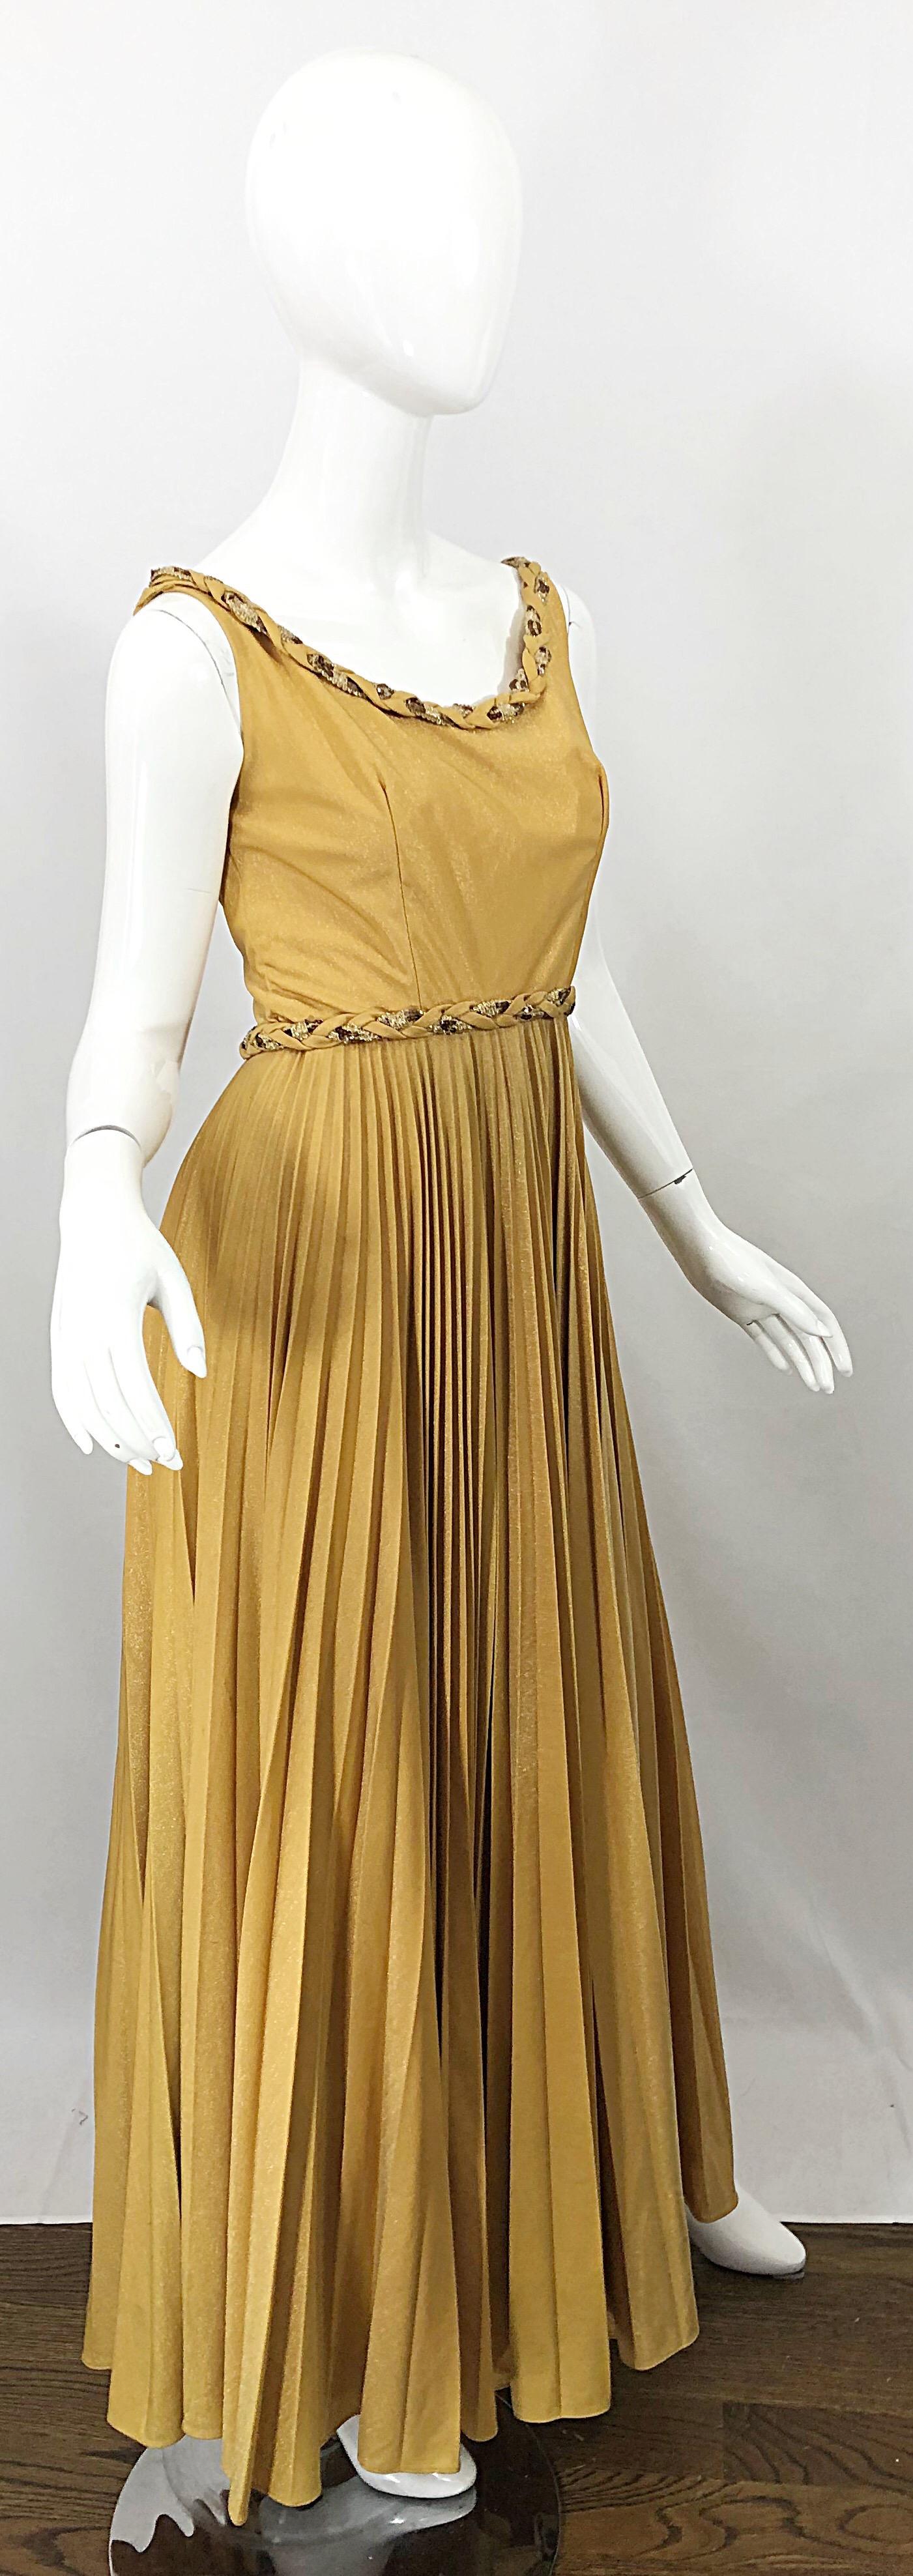 Emma Domb 1970s Gold Metallic Jersey Grecian Style Sequined Vintage 70s Gown For Sale 4